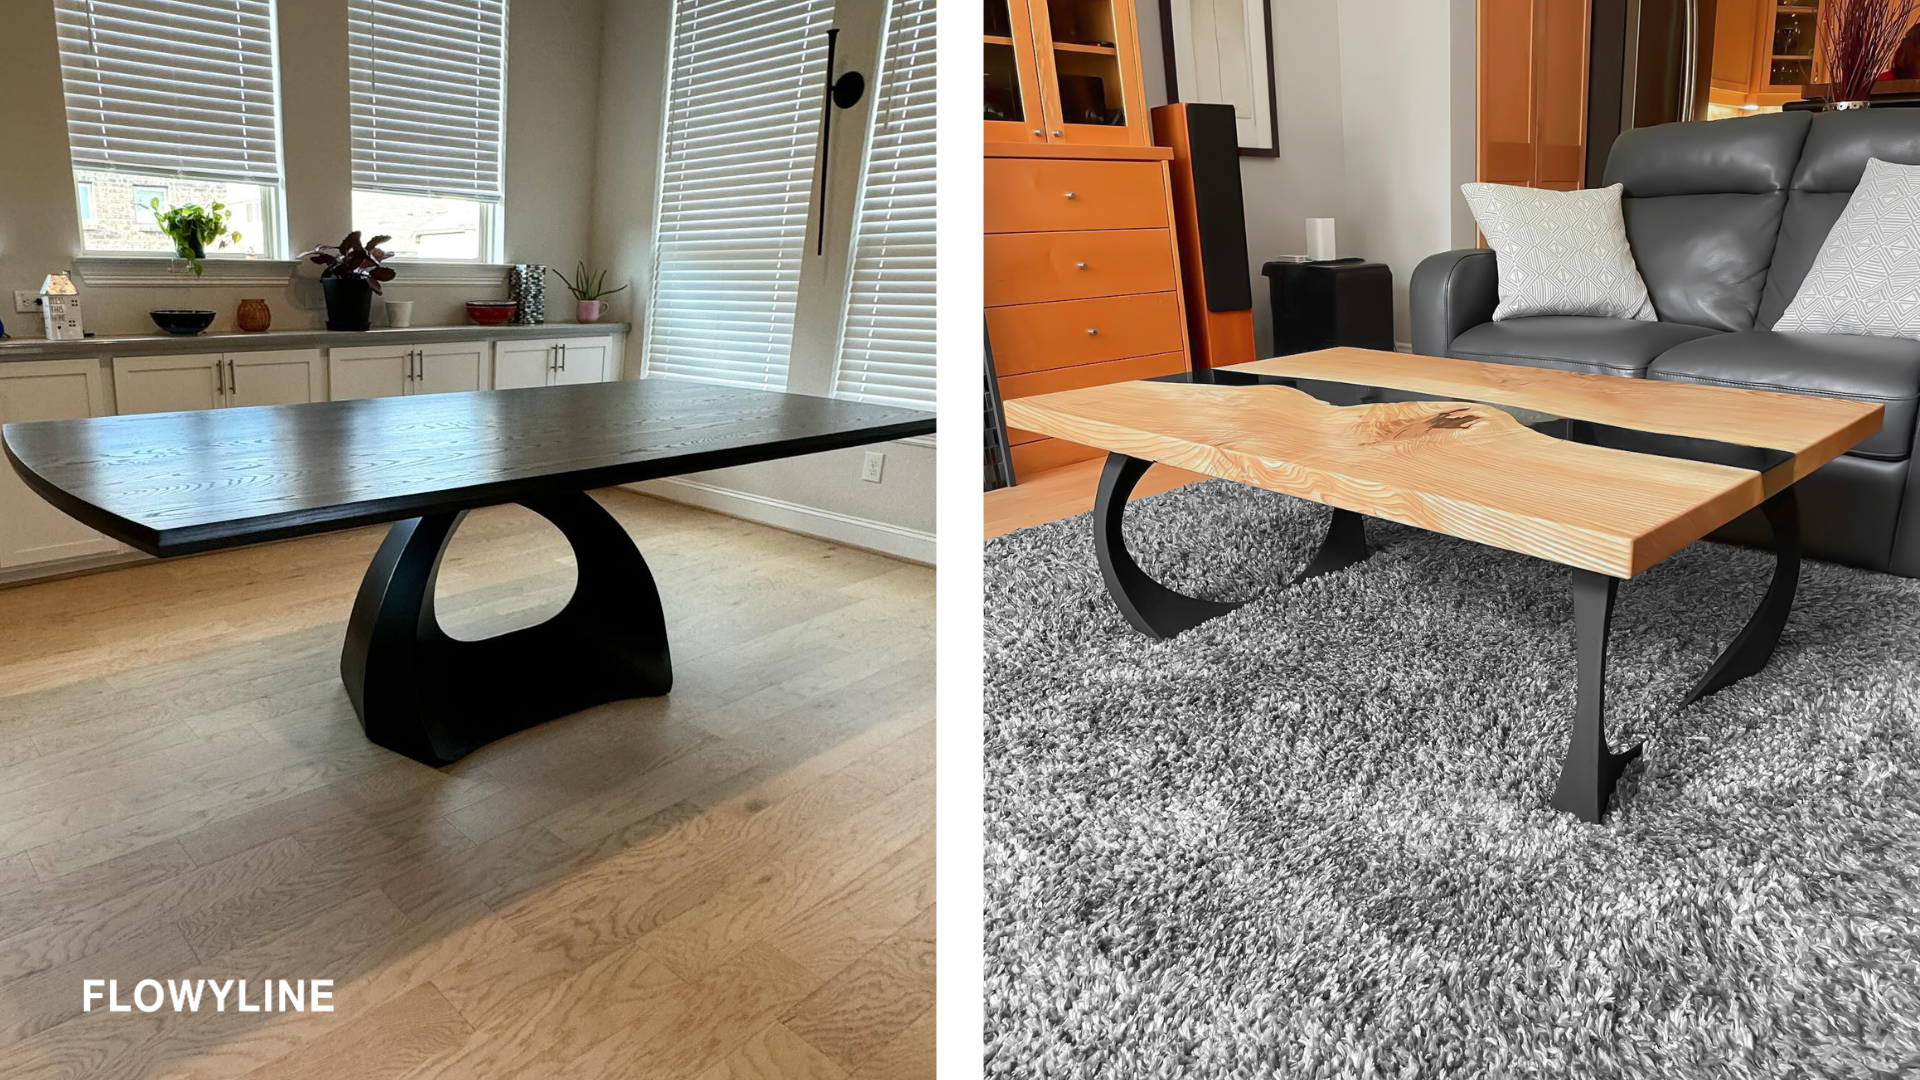 Unique table leg designs can highlight the entire living space